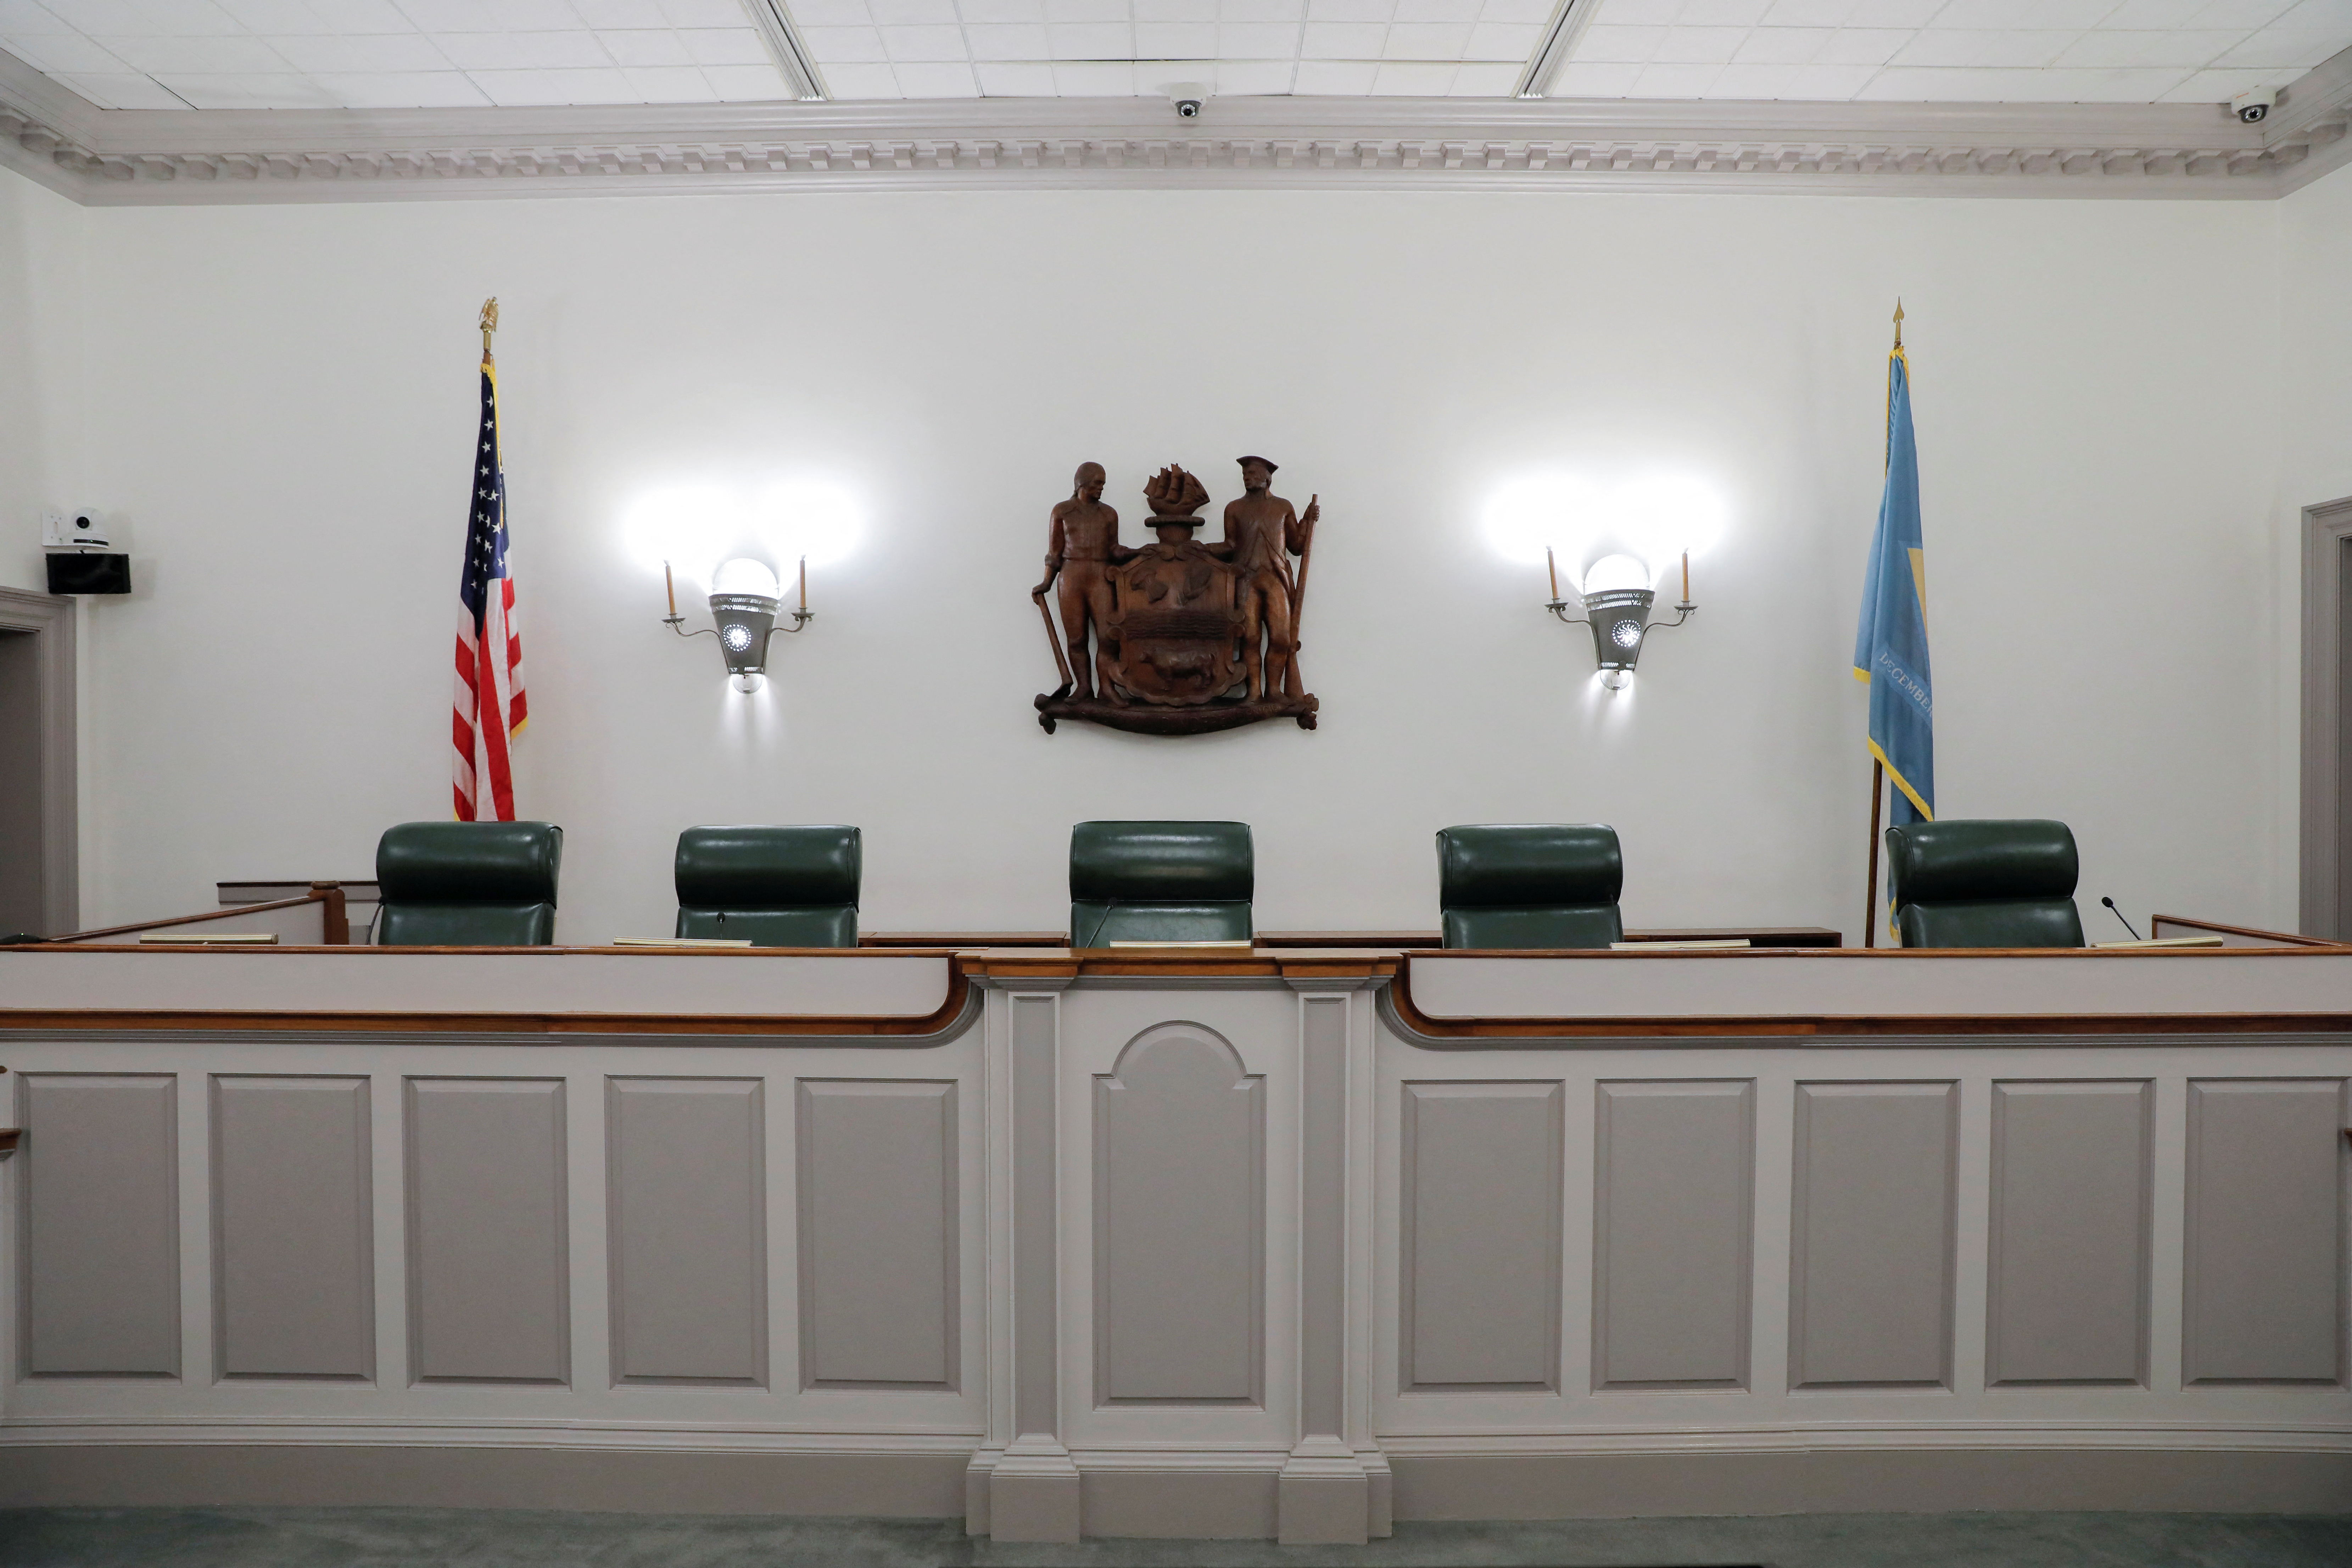 The judge's bench is seen in a courtroom at the Delaware Supreme Court in Dover, Delaware